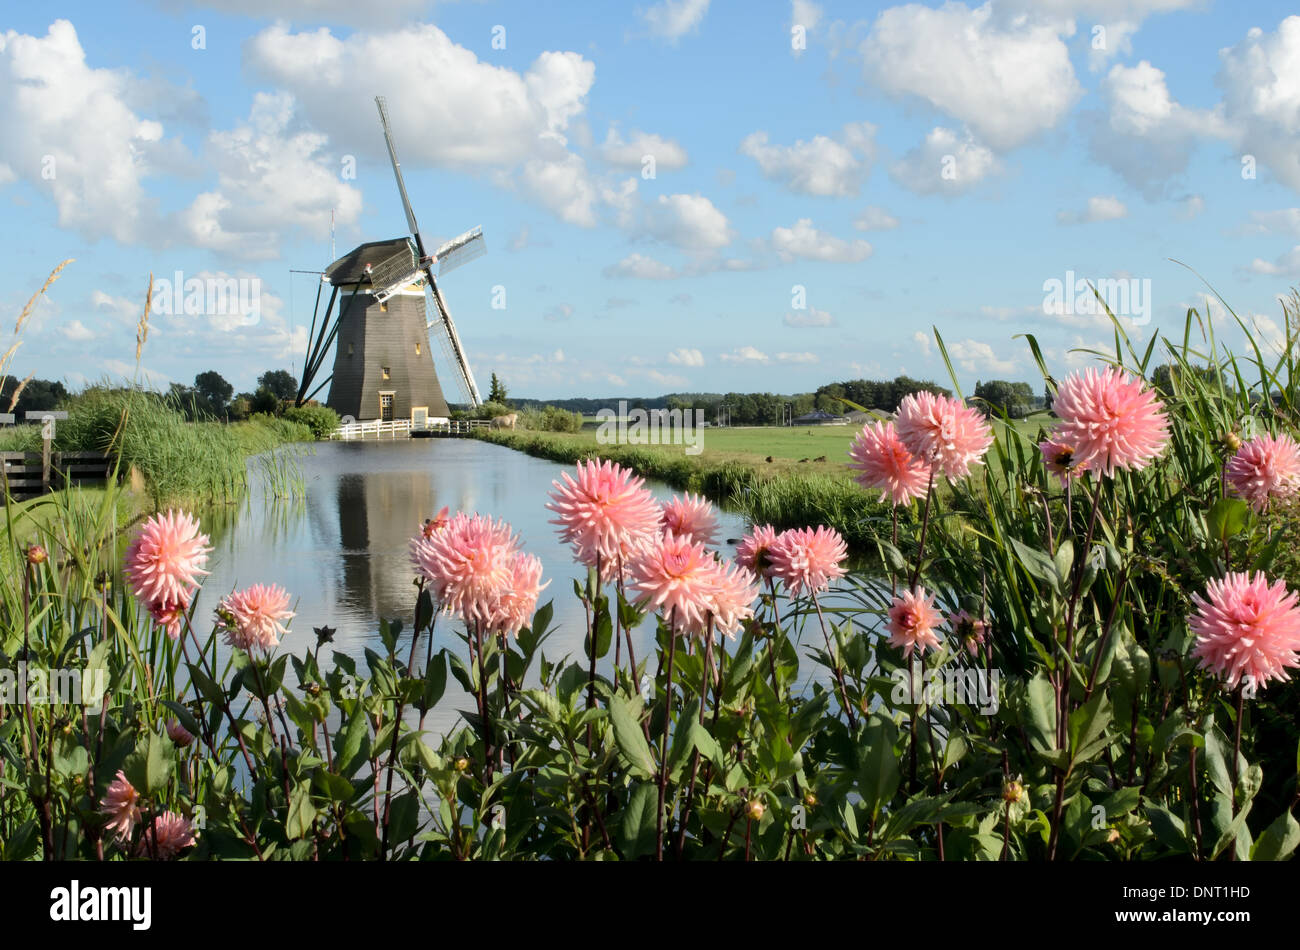 Landscape in Holland with a windmill, pink dahlia flowers and a canal. Stock Photo